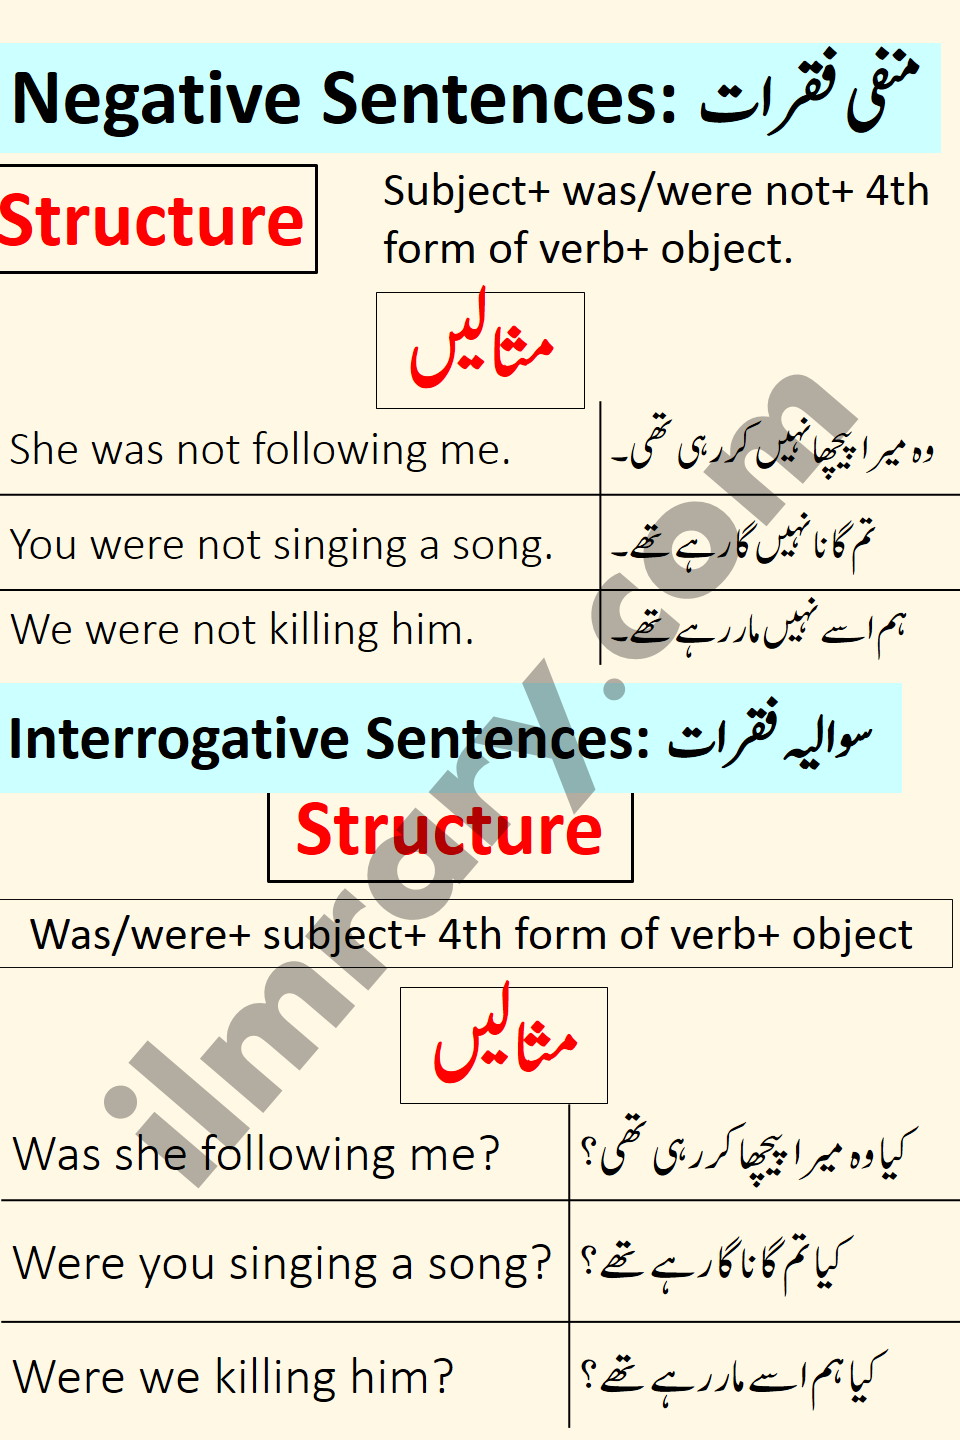 Interrogative and Negative Examples for Past Continuous Tense in Urdu